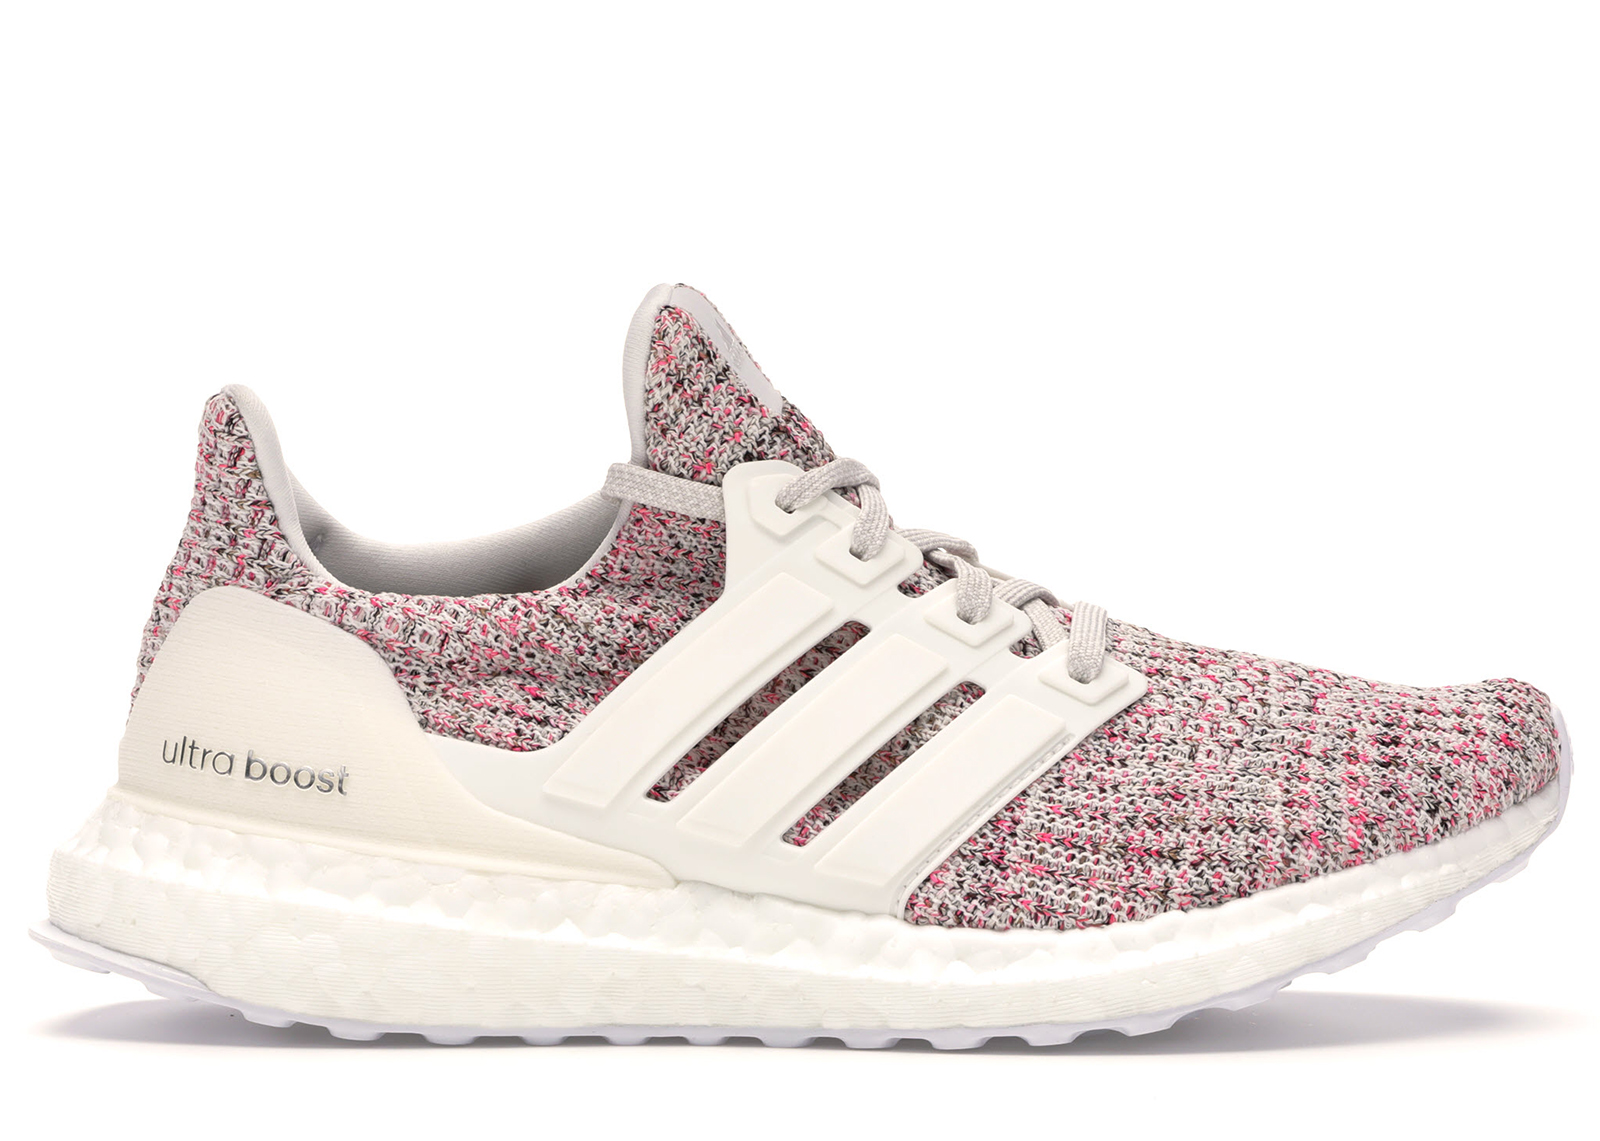 Adidas Ultraboost Shoes - Women's - Chalk Pearl / White / Pink - 5